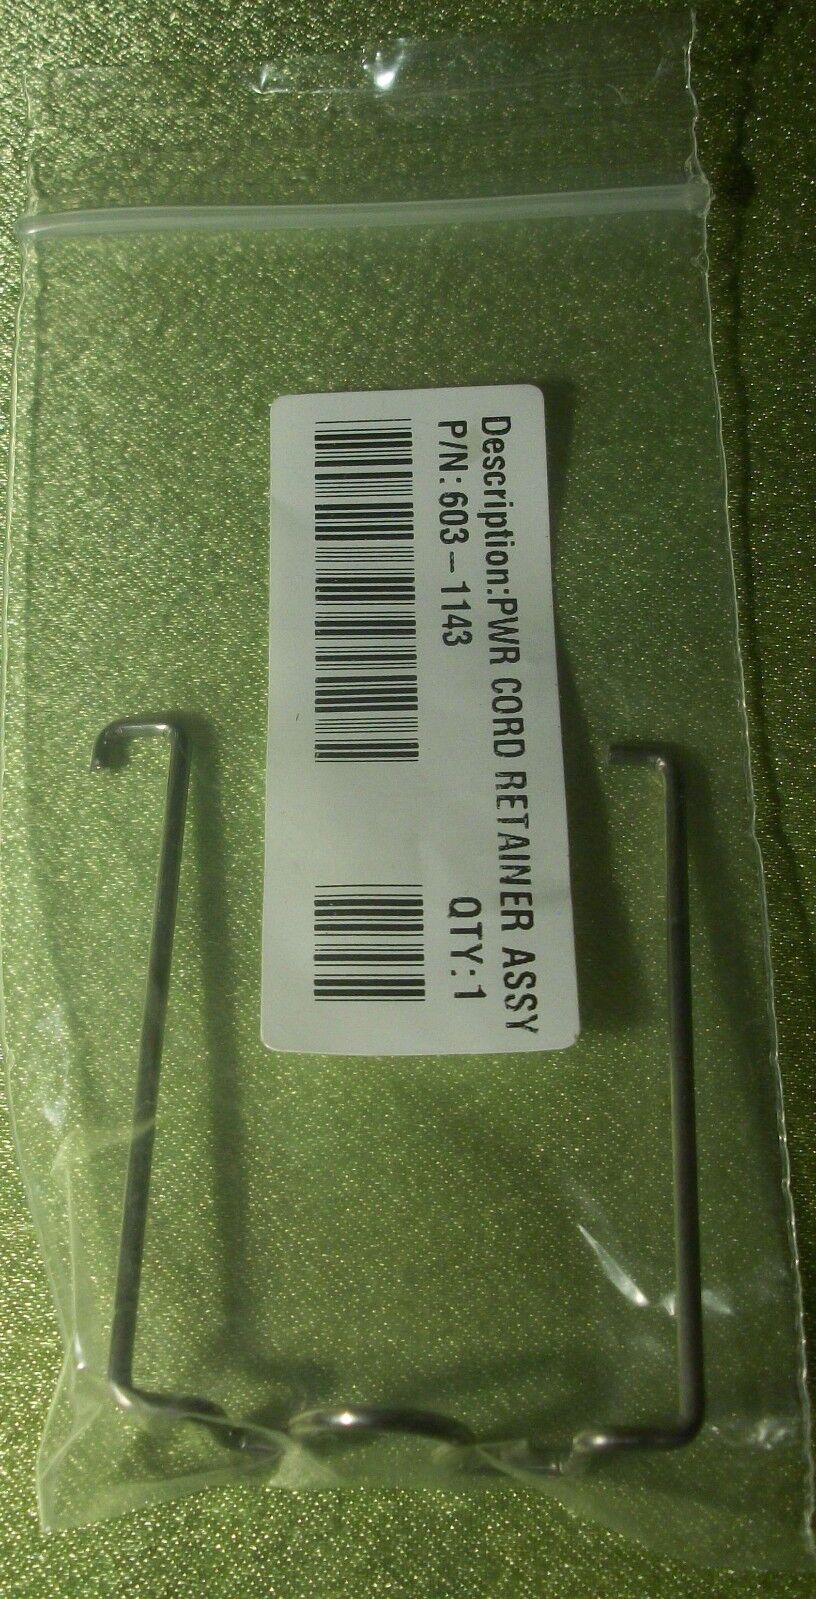 NEW OEM Apple Xserve Power Cord Retainer Assembly Pin 603-1143 *FREE US SHIPPING